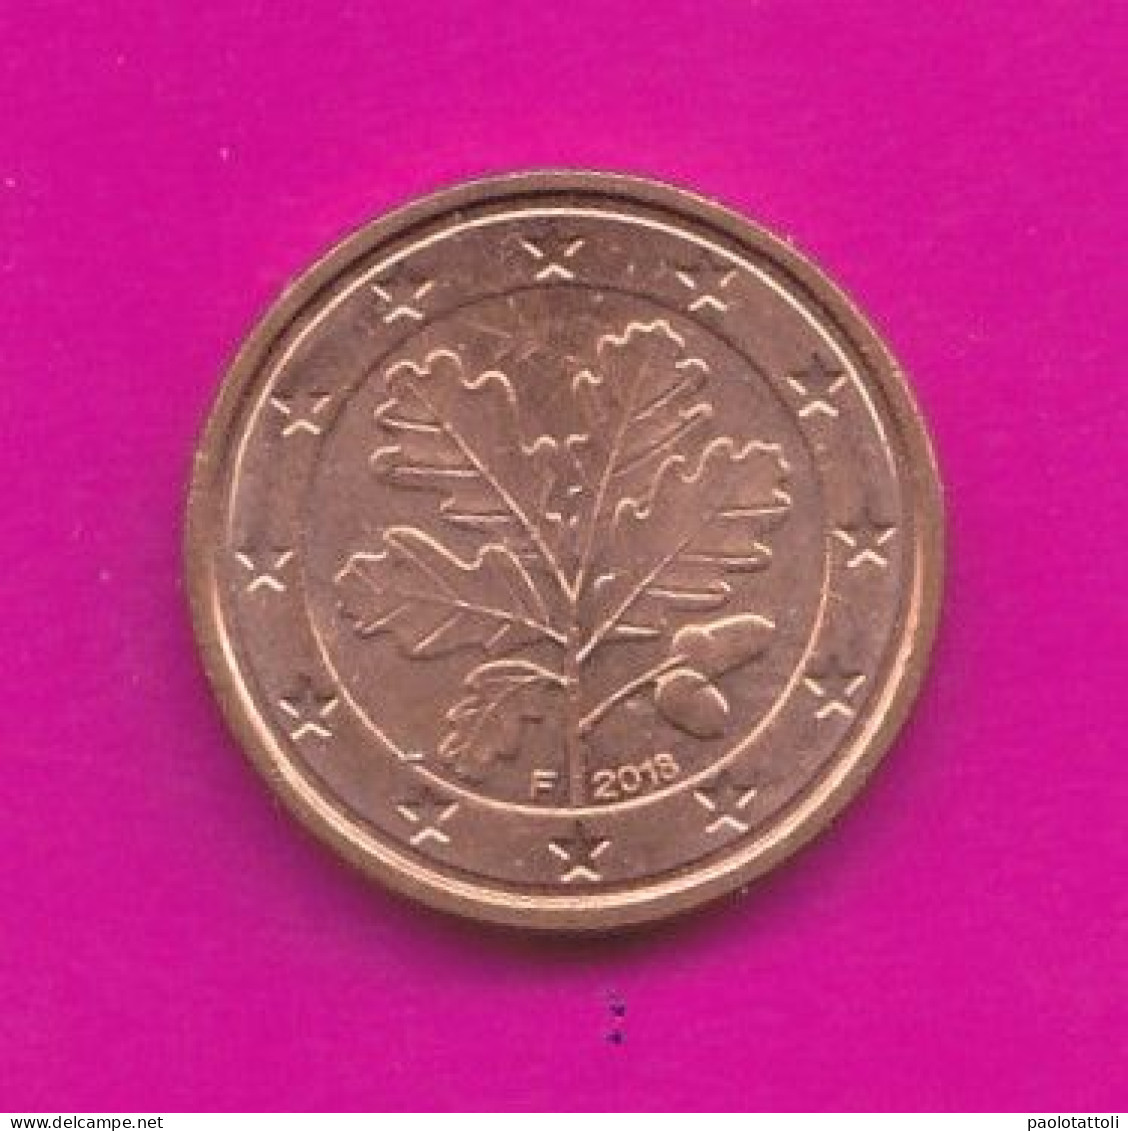 Germany, F 2018- 1 Euro Cent- Mint Of Stoccarda- Copper Plated Steel- Obverse Oak Leaf. Reverse Denomination- - Germany